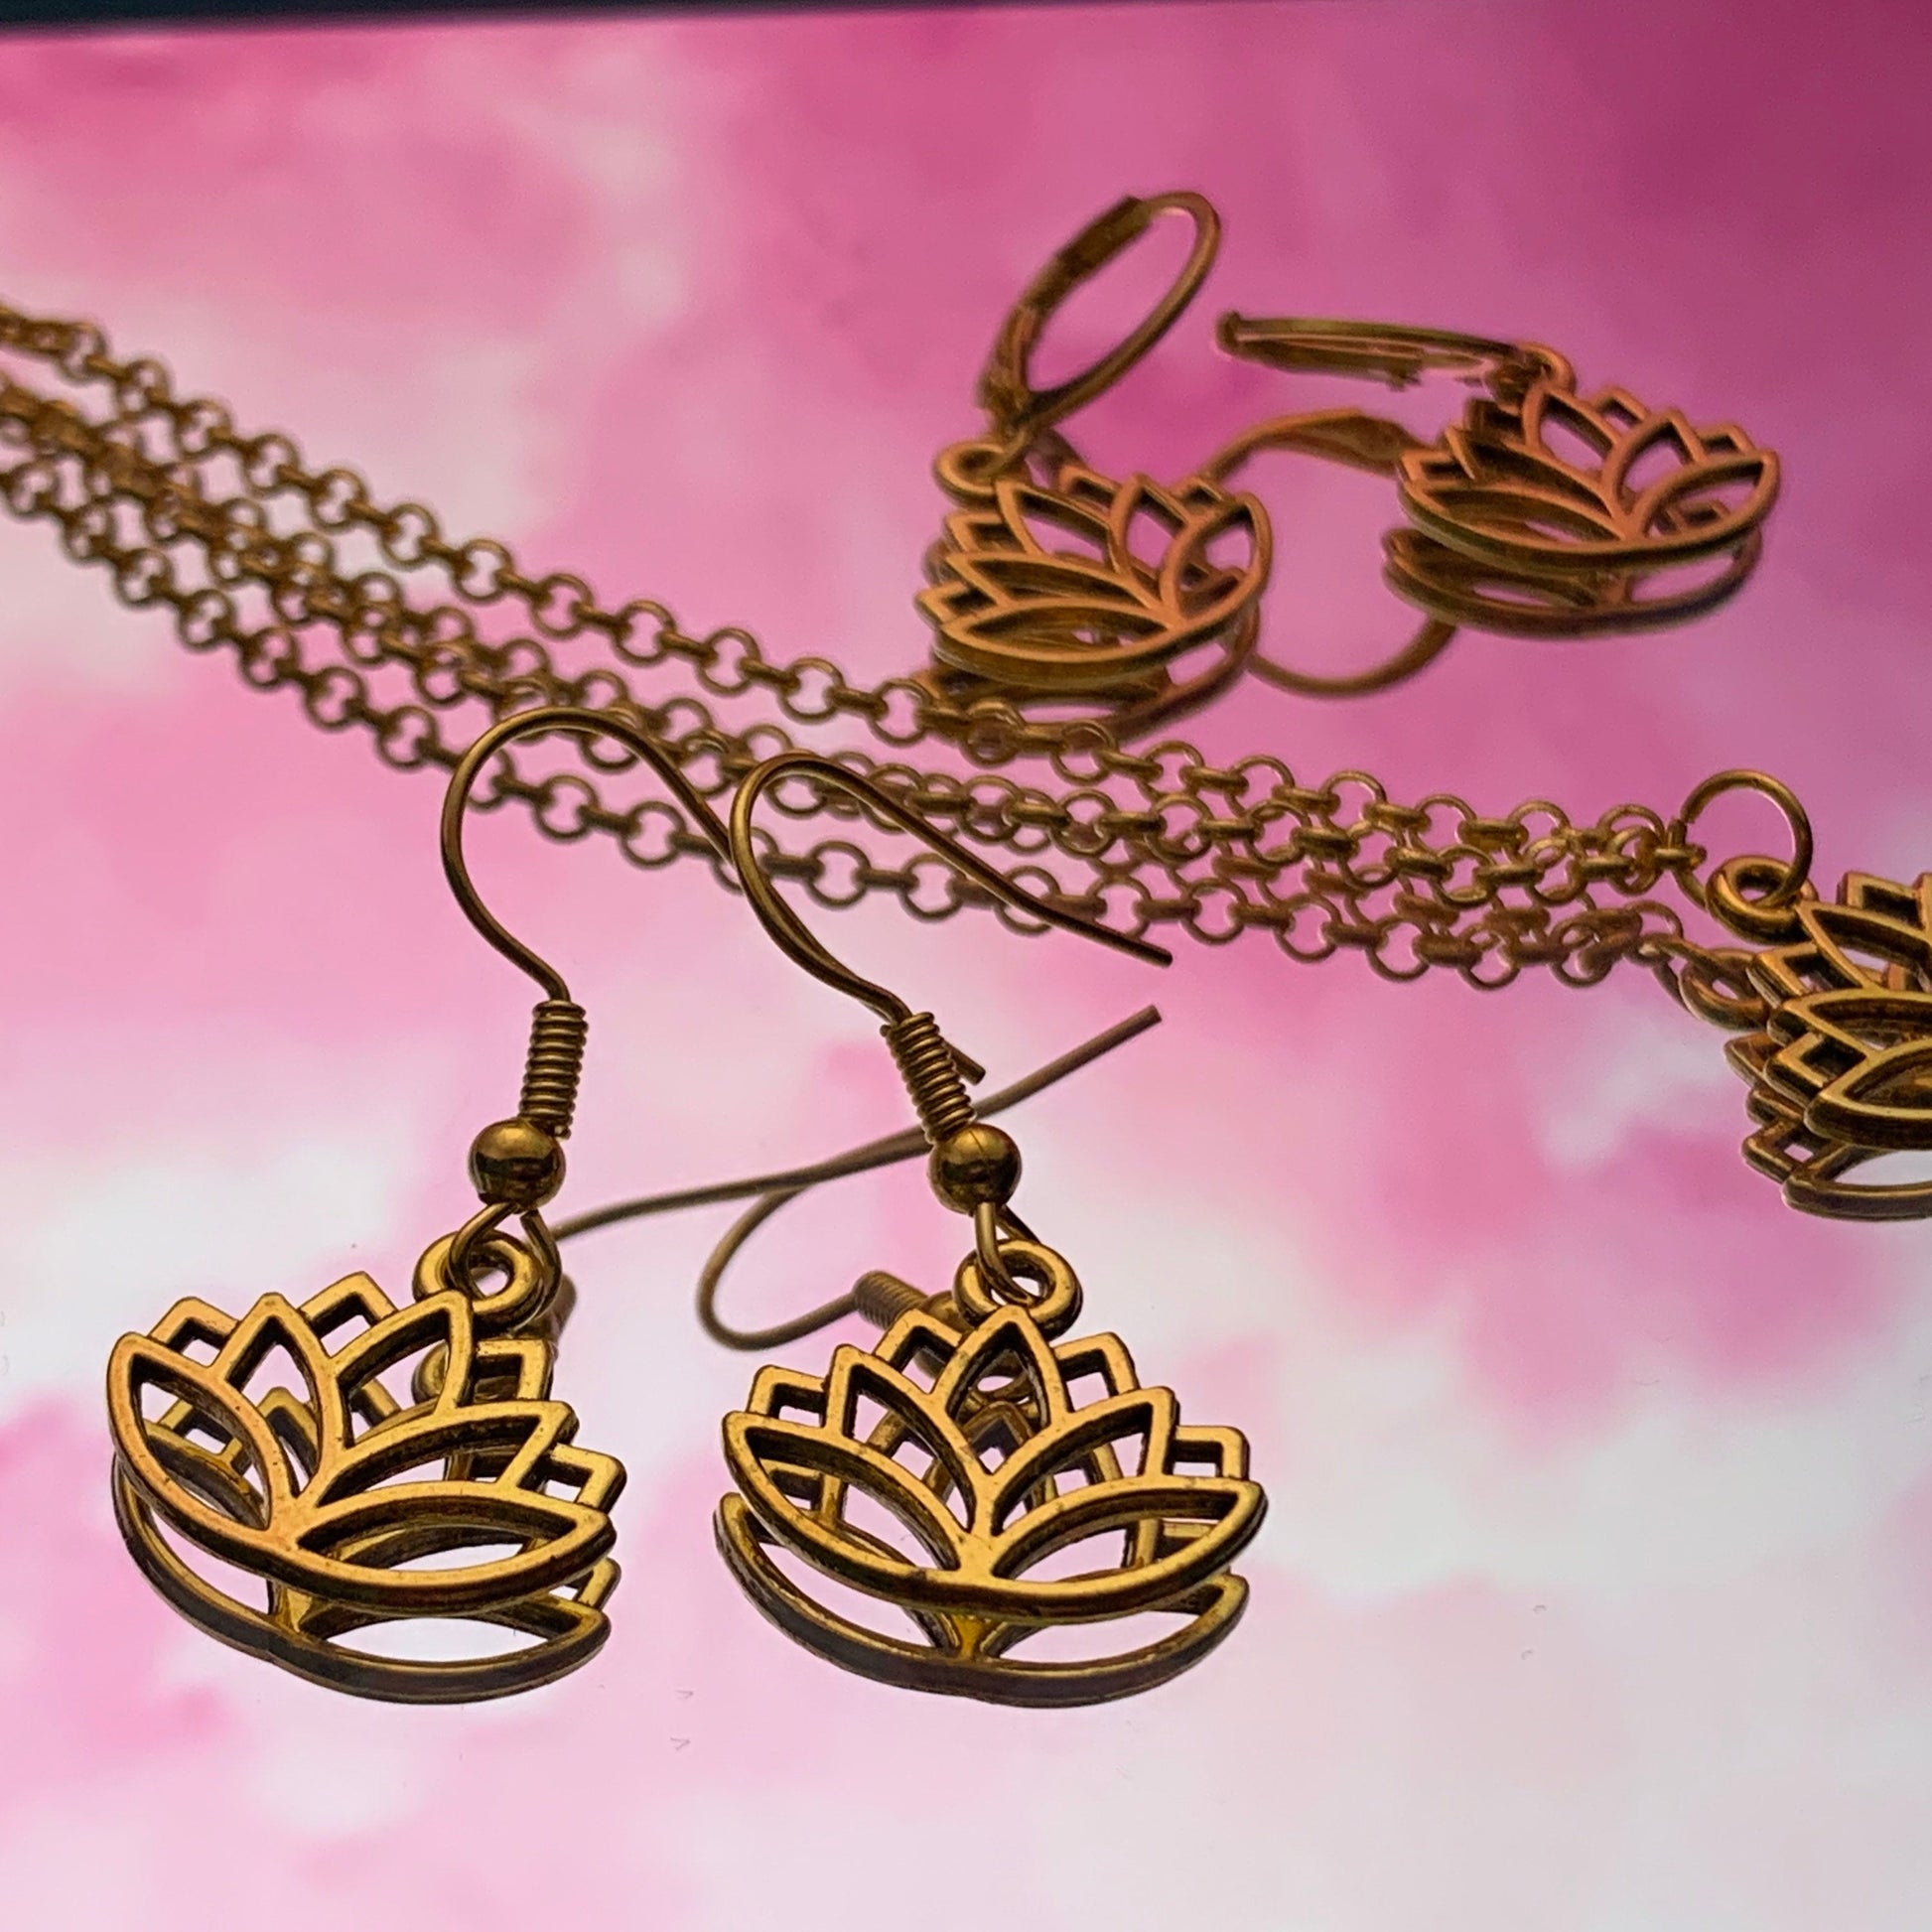 Gold or Silver Lotus Flower Charm Necklace and Earring Set - Lxyclr Authentic